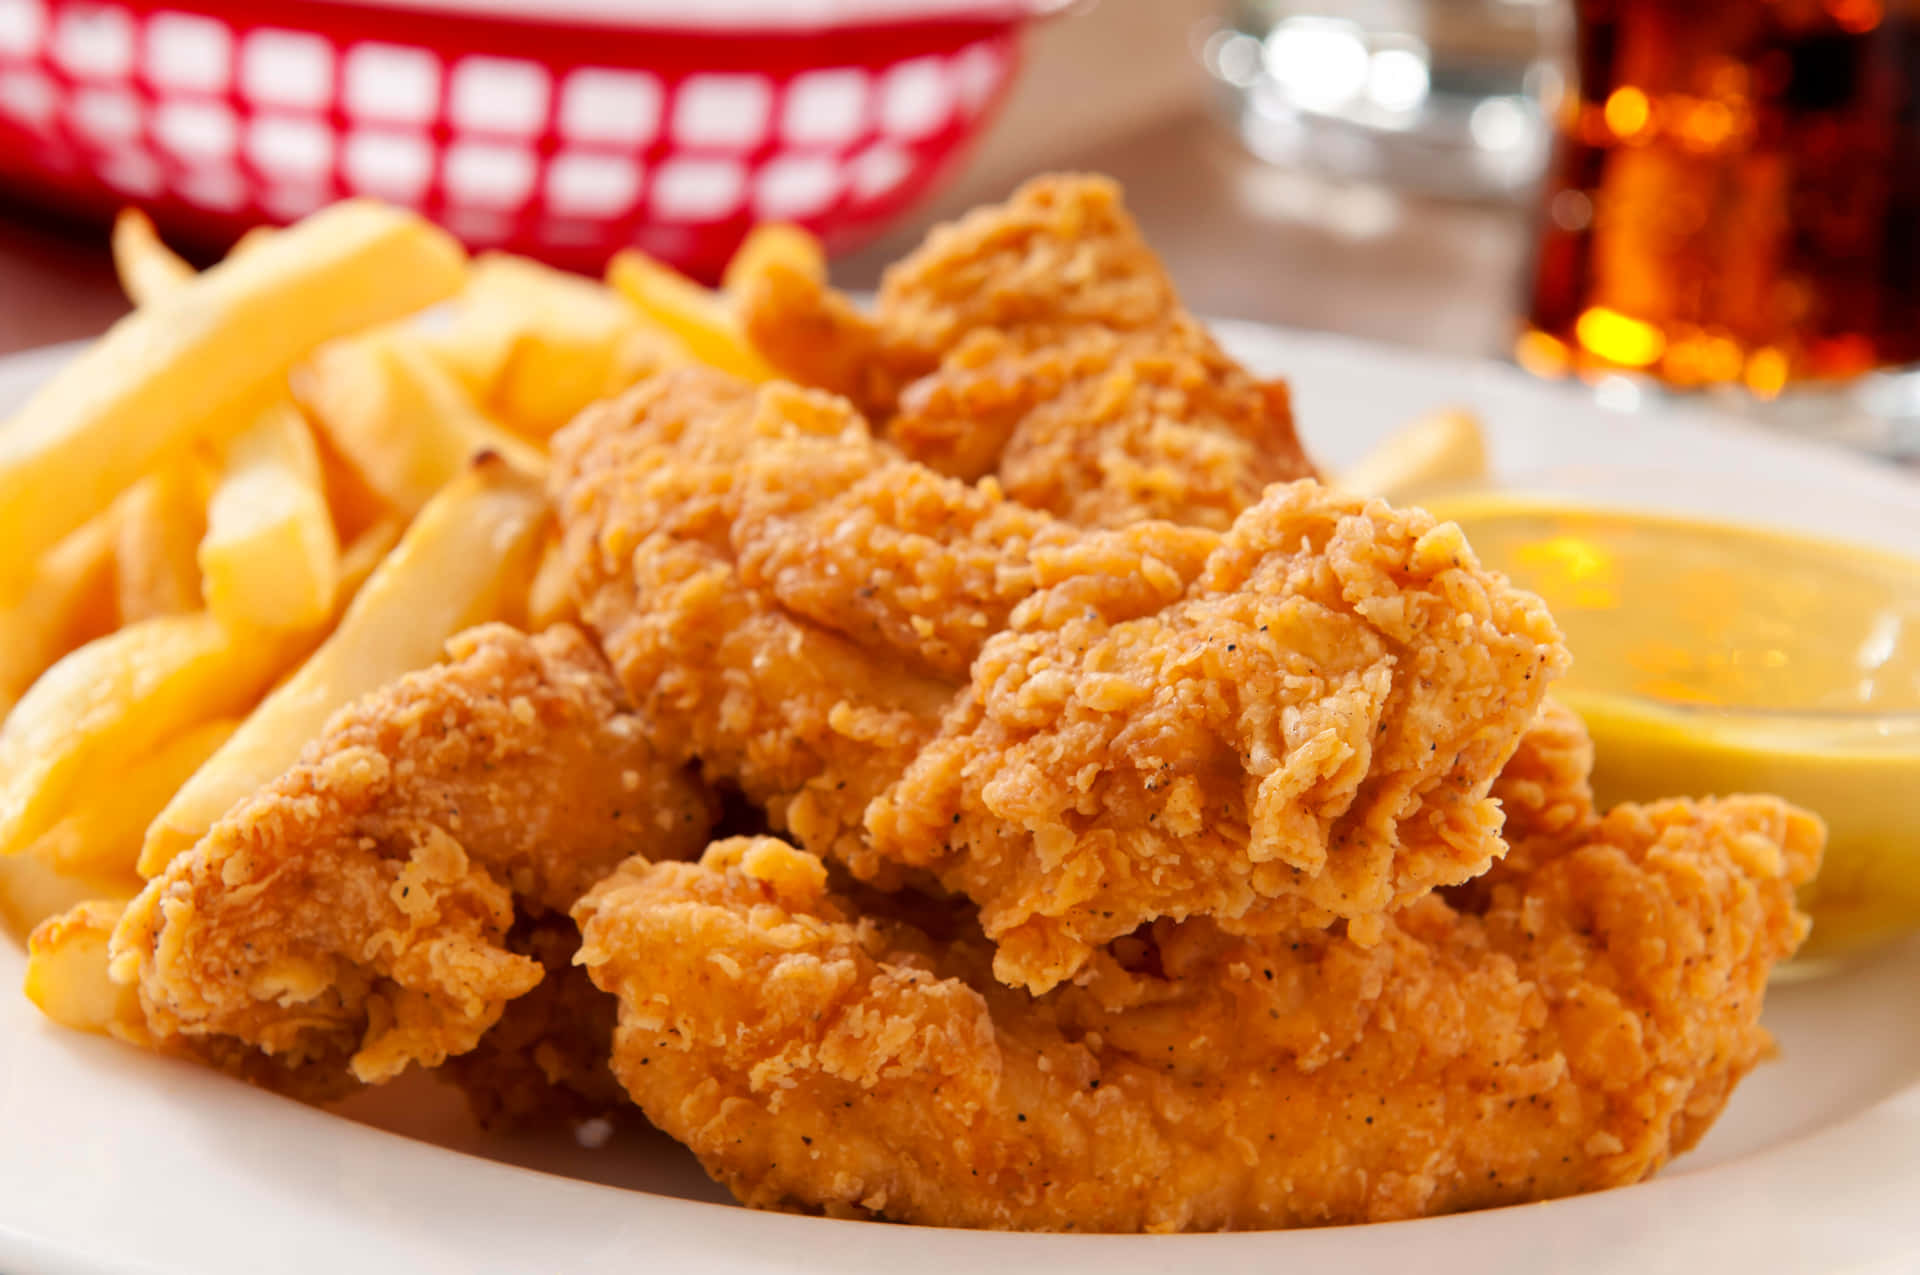 Delicious Tender Chicken and Fries Wallpaper